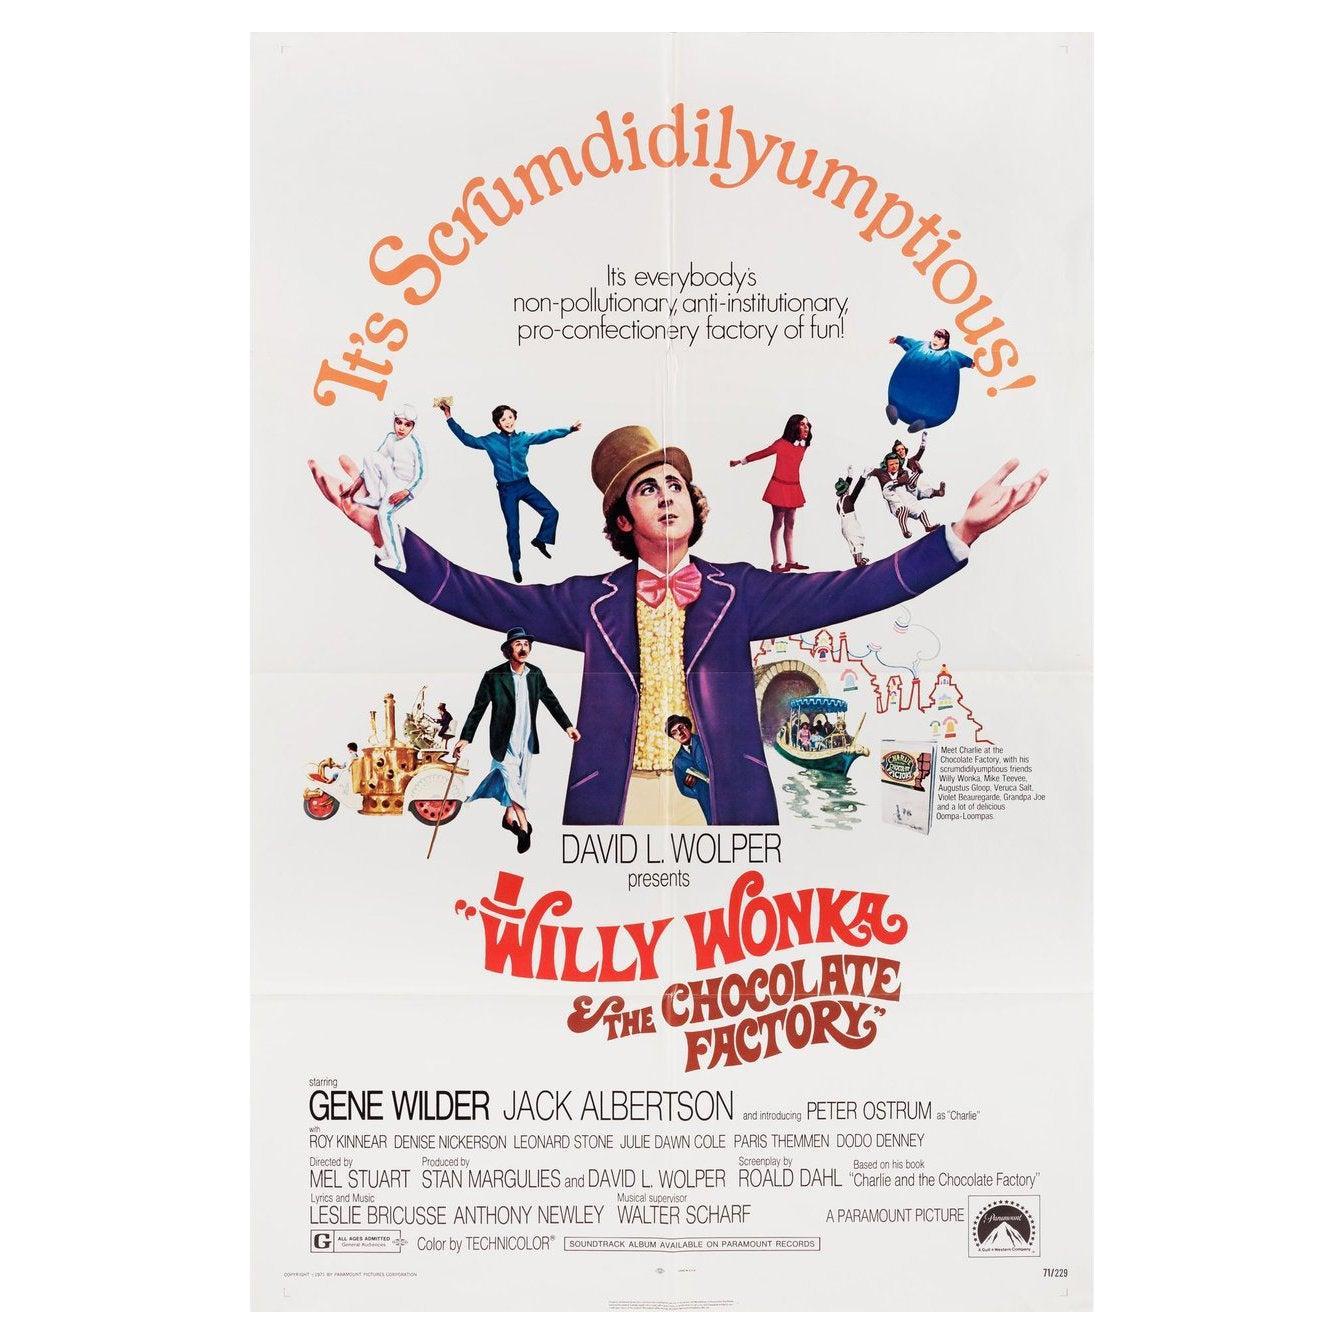 Willy Wonka & the Chocolate Factory 1971 U.S. One Sheet Film Poster For Sale